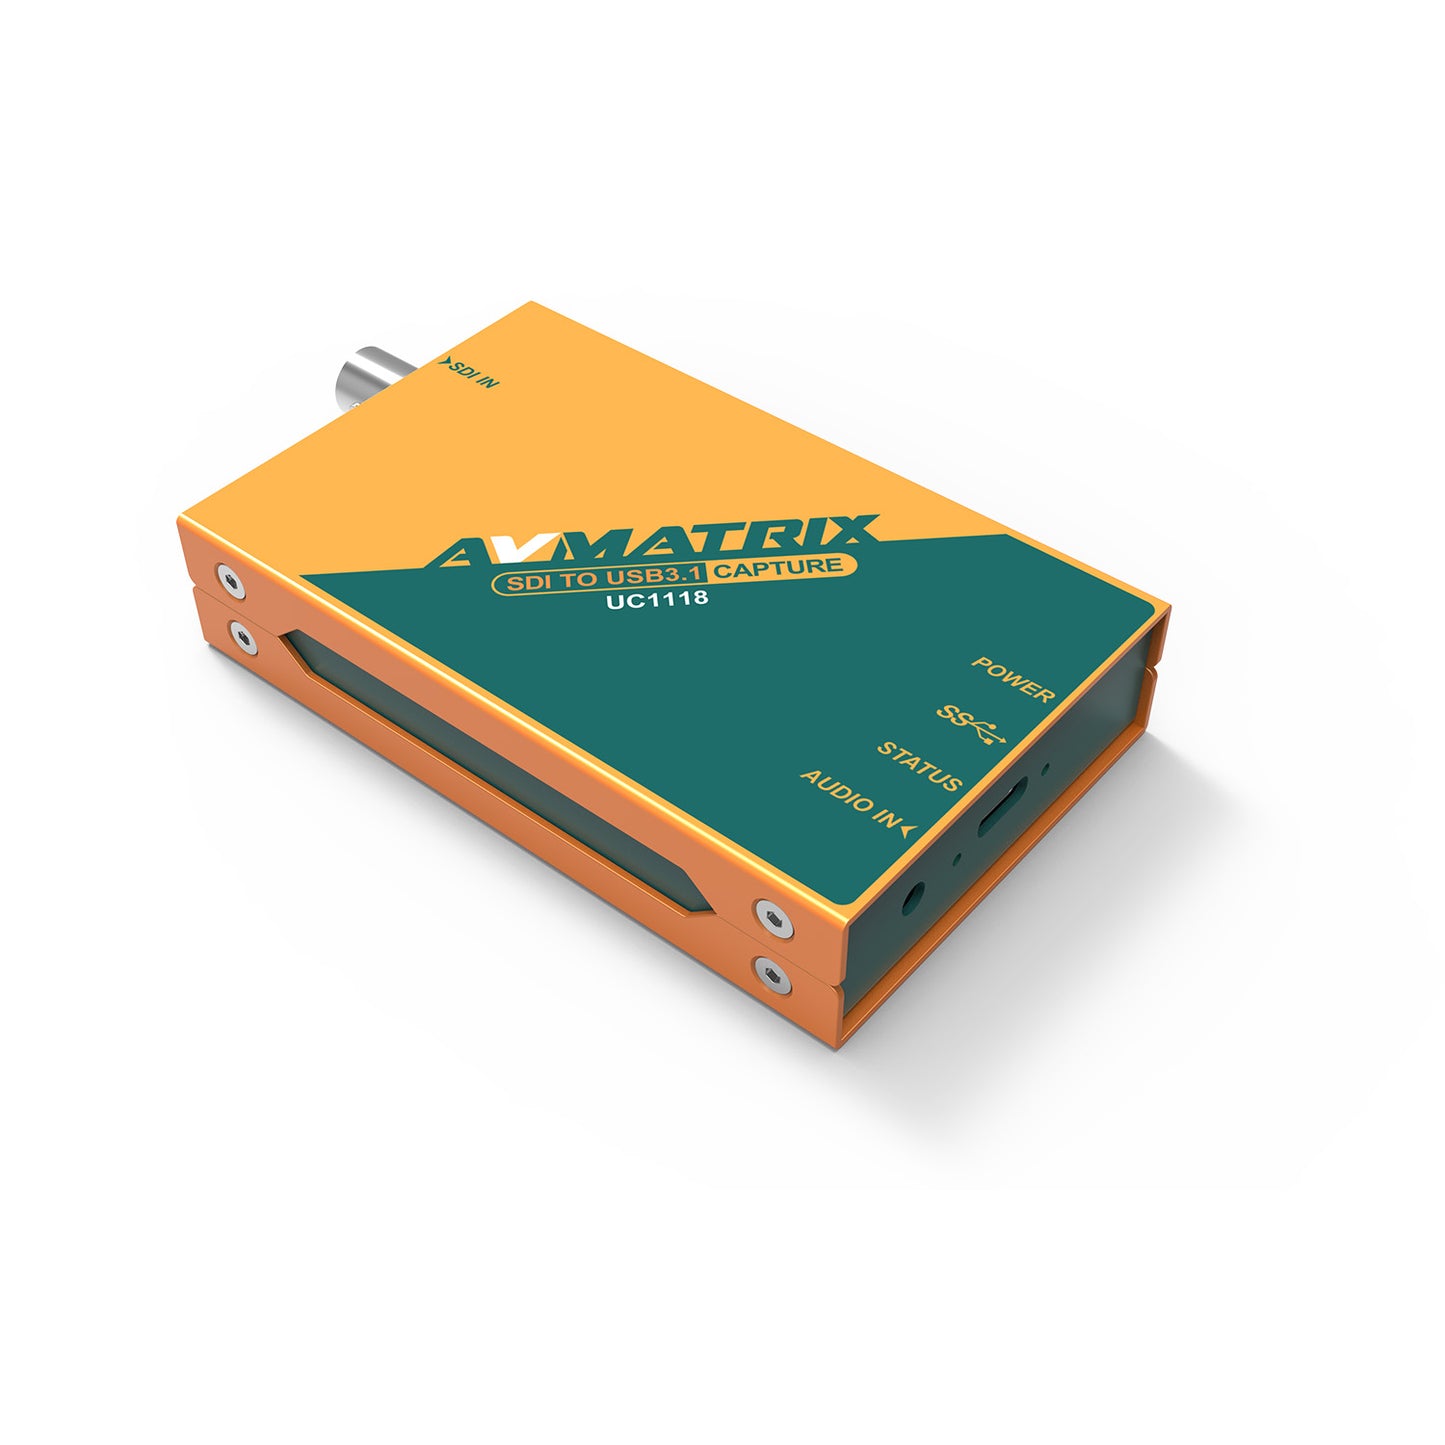 AVMatrix Uncompressed Video Capture UC1118 SDI / UC1218 HDMI / UC2018 HDMI/SDI to USB3.1 Type C with Auto Input Signal Detection, Up to 1080p60, Rate Up to 200MB/s via USB 3.1 Gen1 for Windows, Linux, macOS